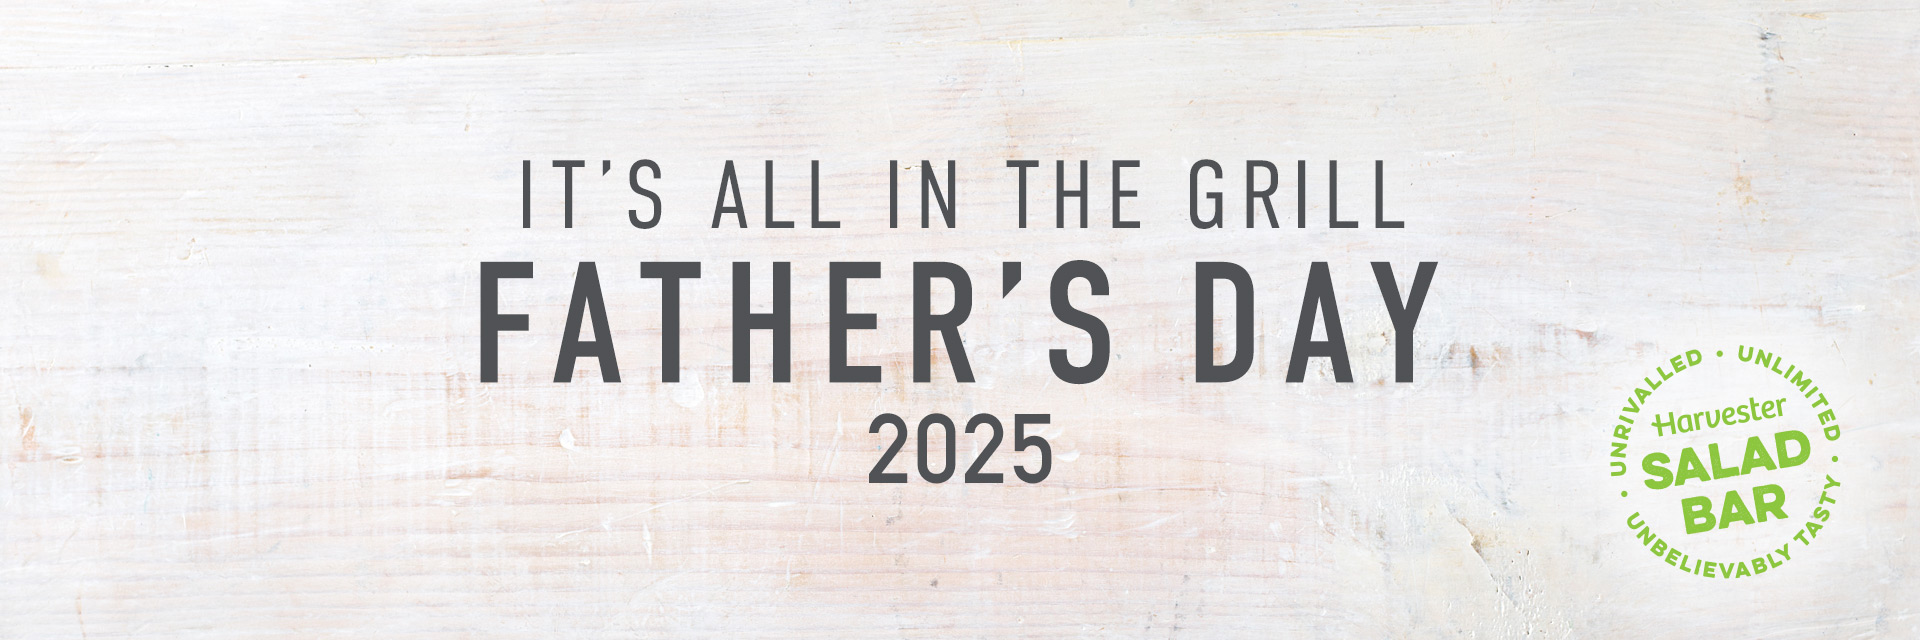 Father’s Day at Harvester Cardiff Bay